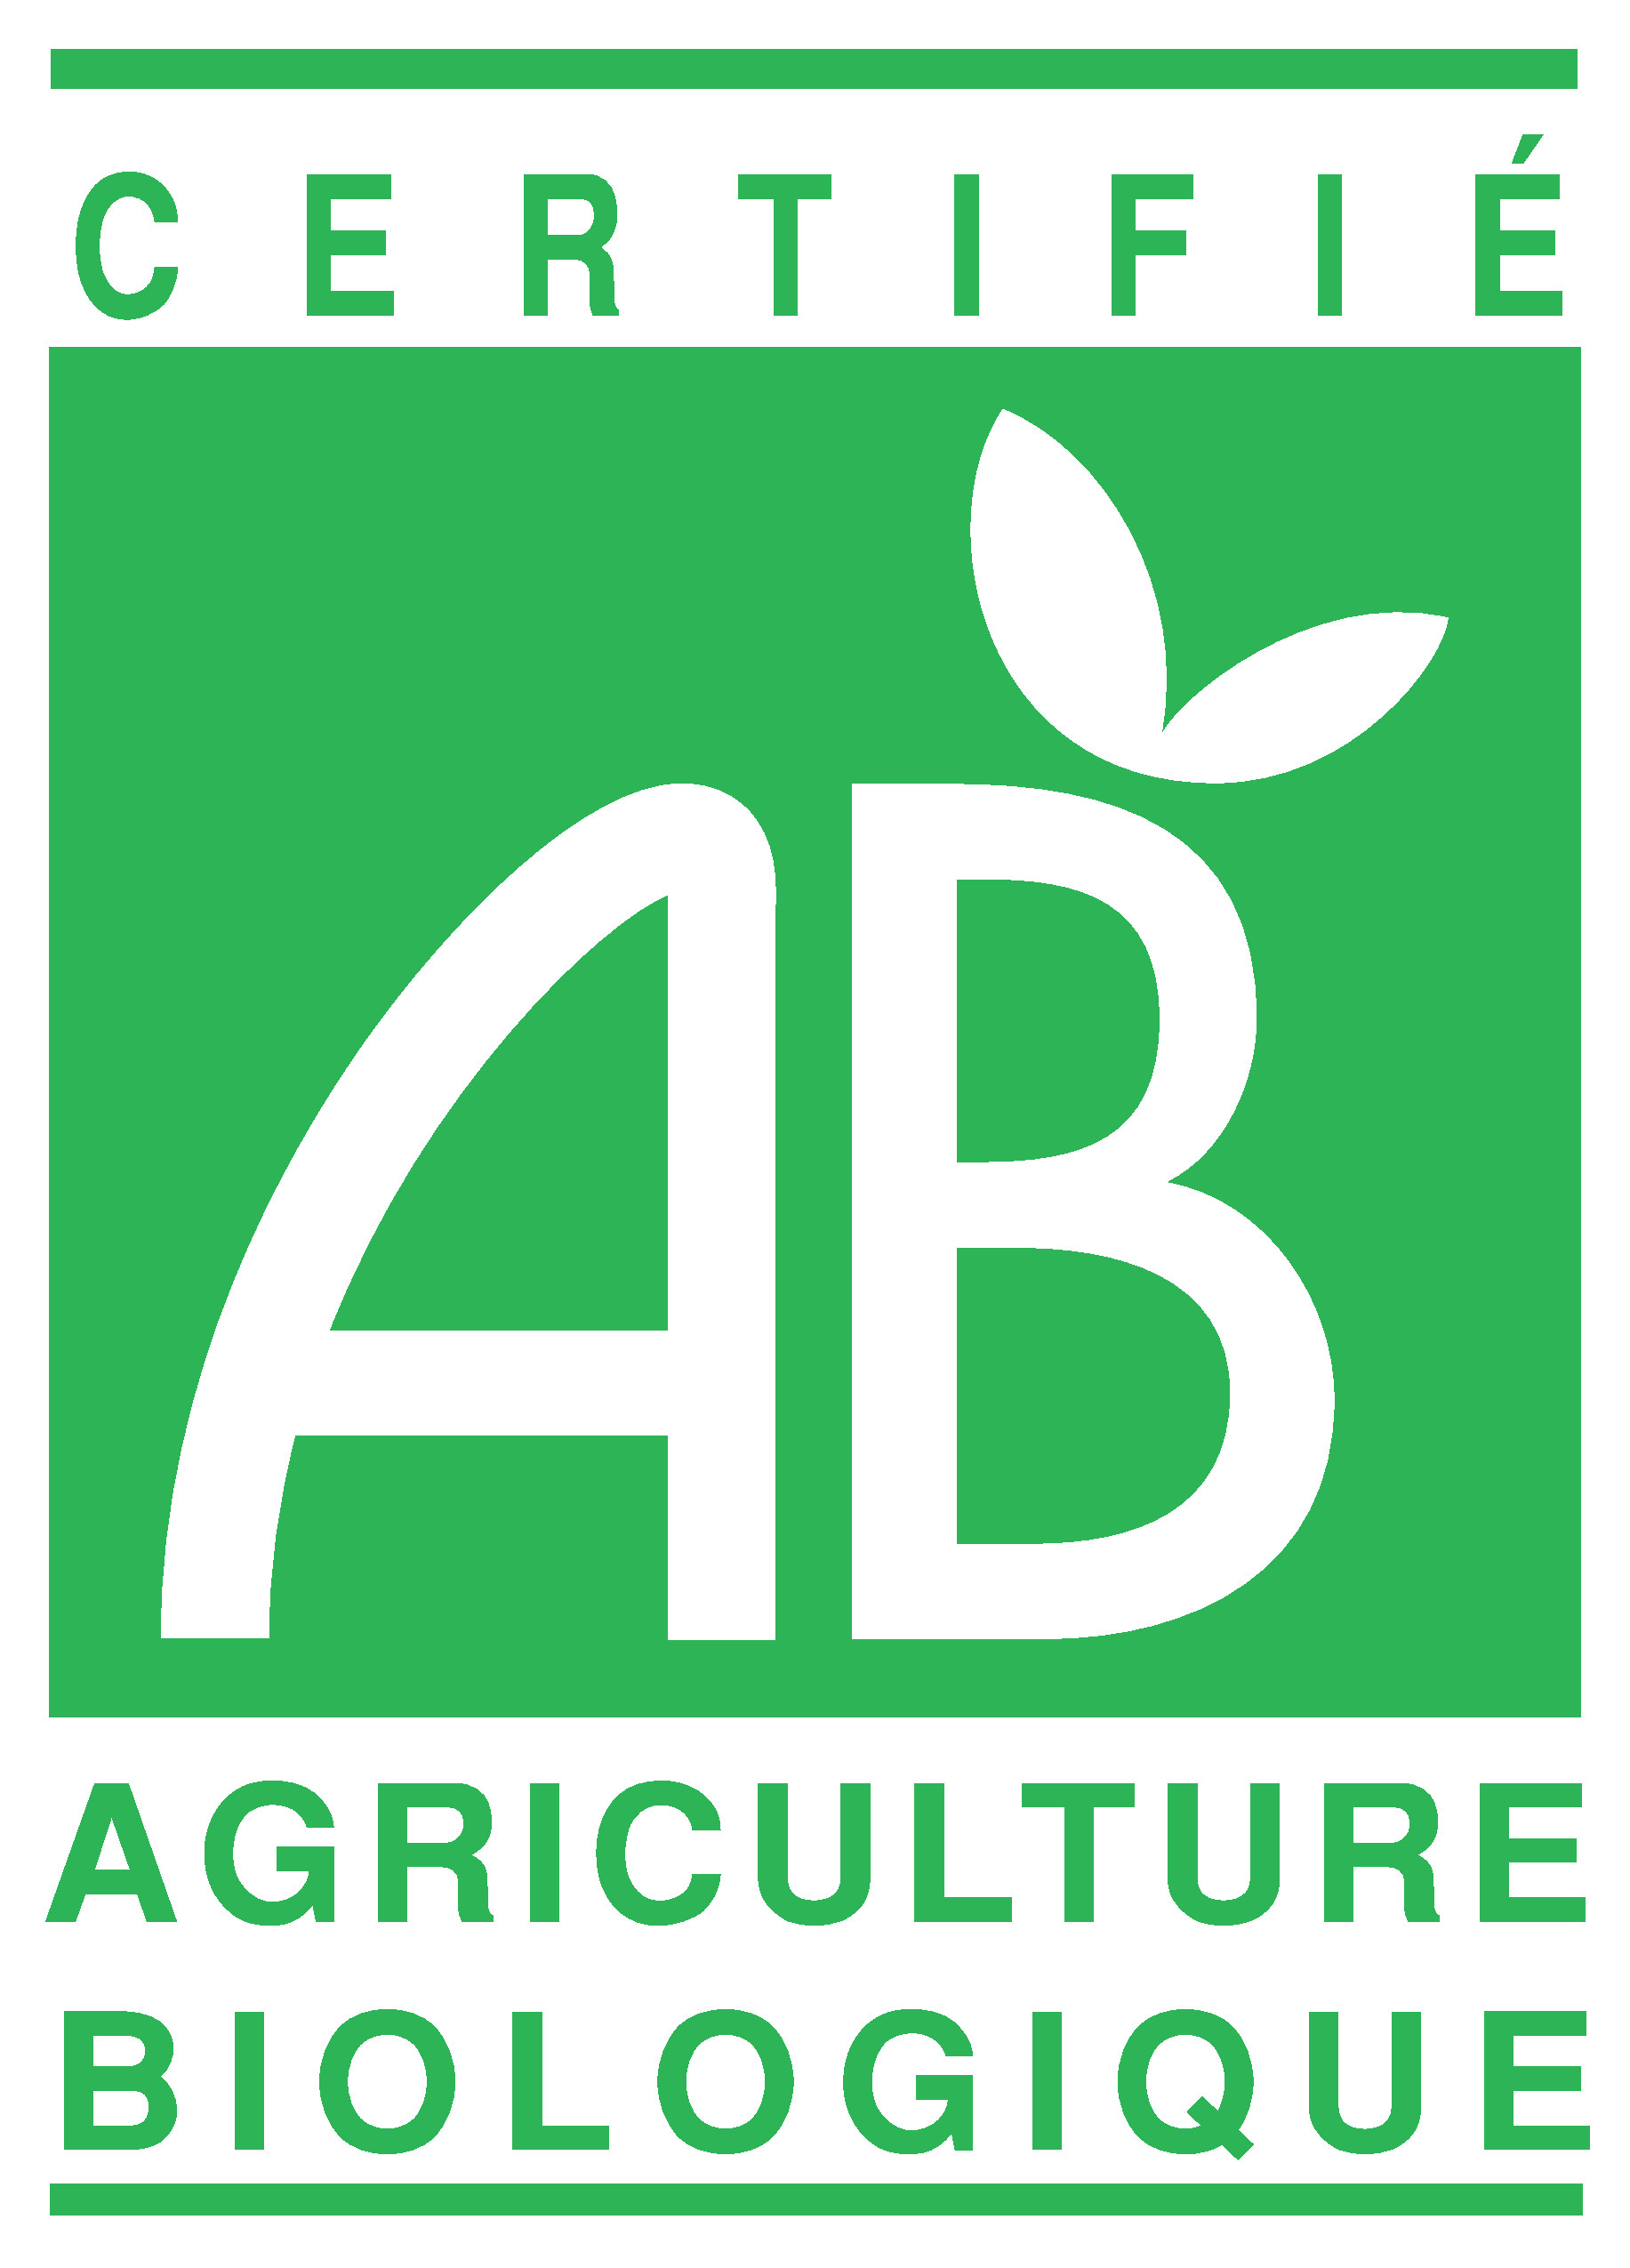 Loucocal biscuiterie Sarlat - logo agriculture bio - AB